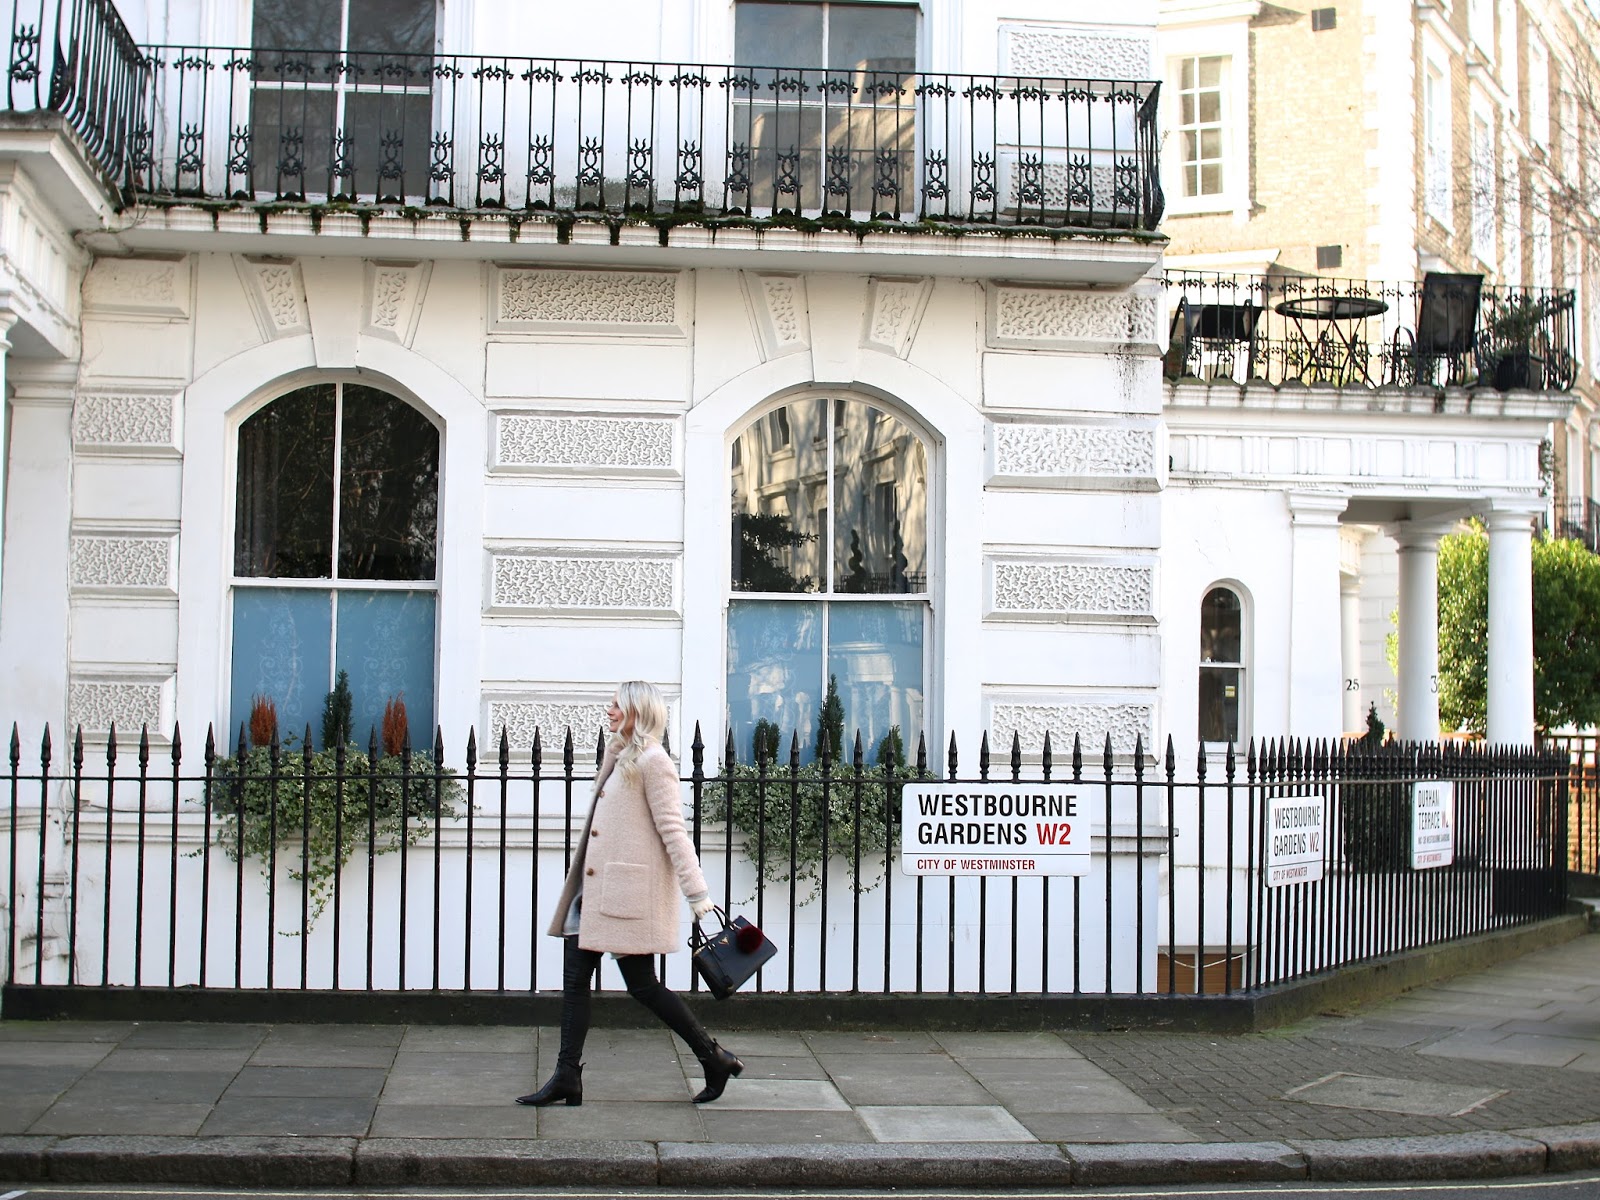 pretty buildings in the streets of london